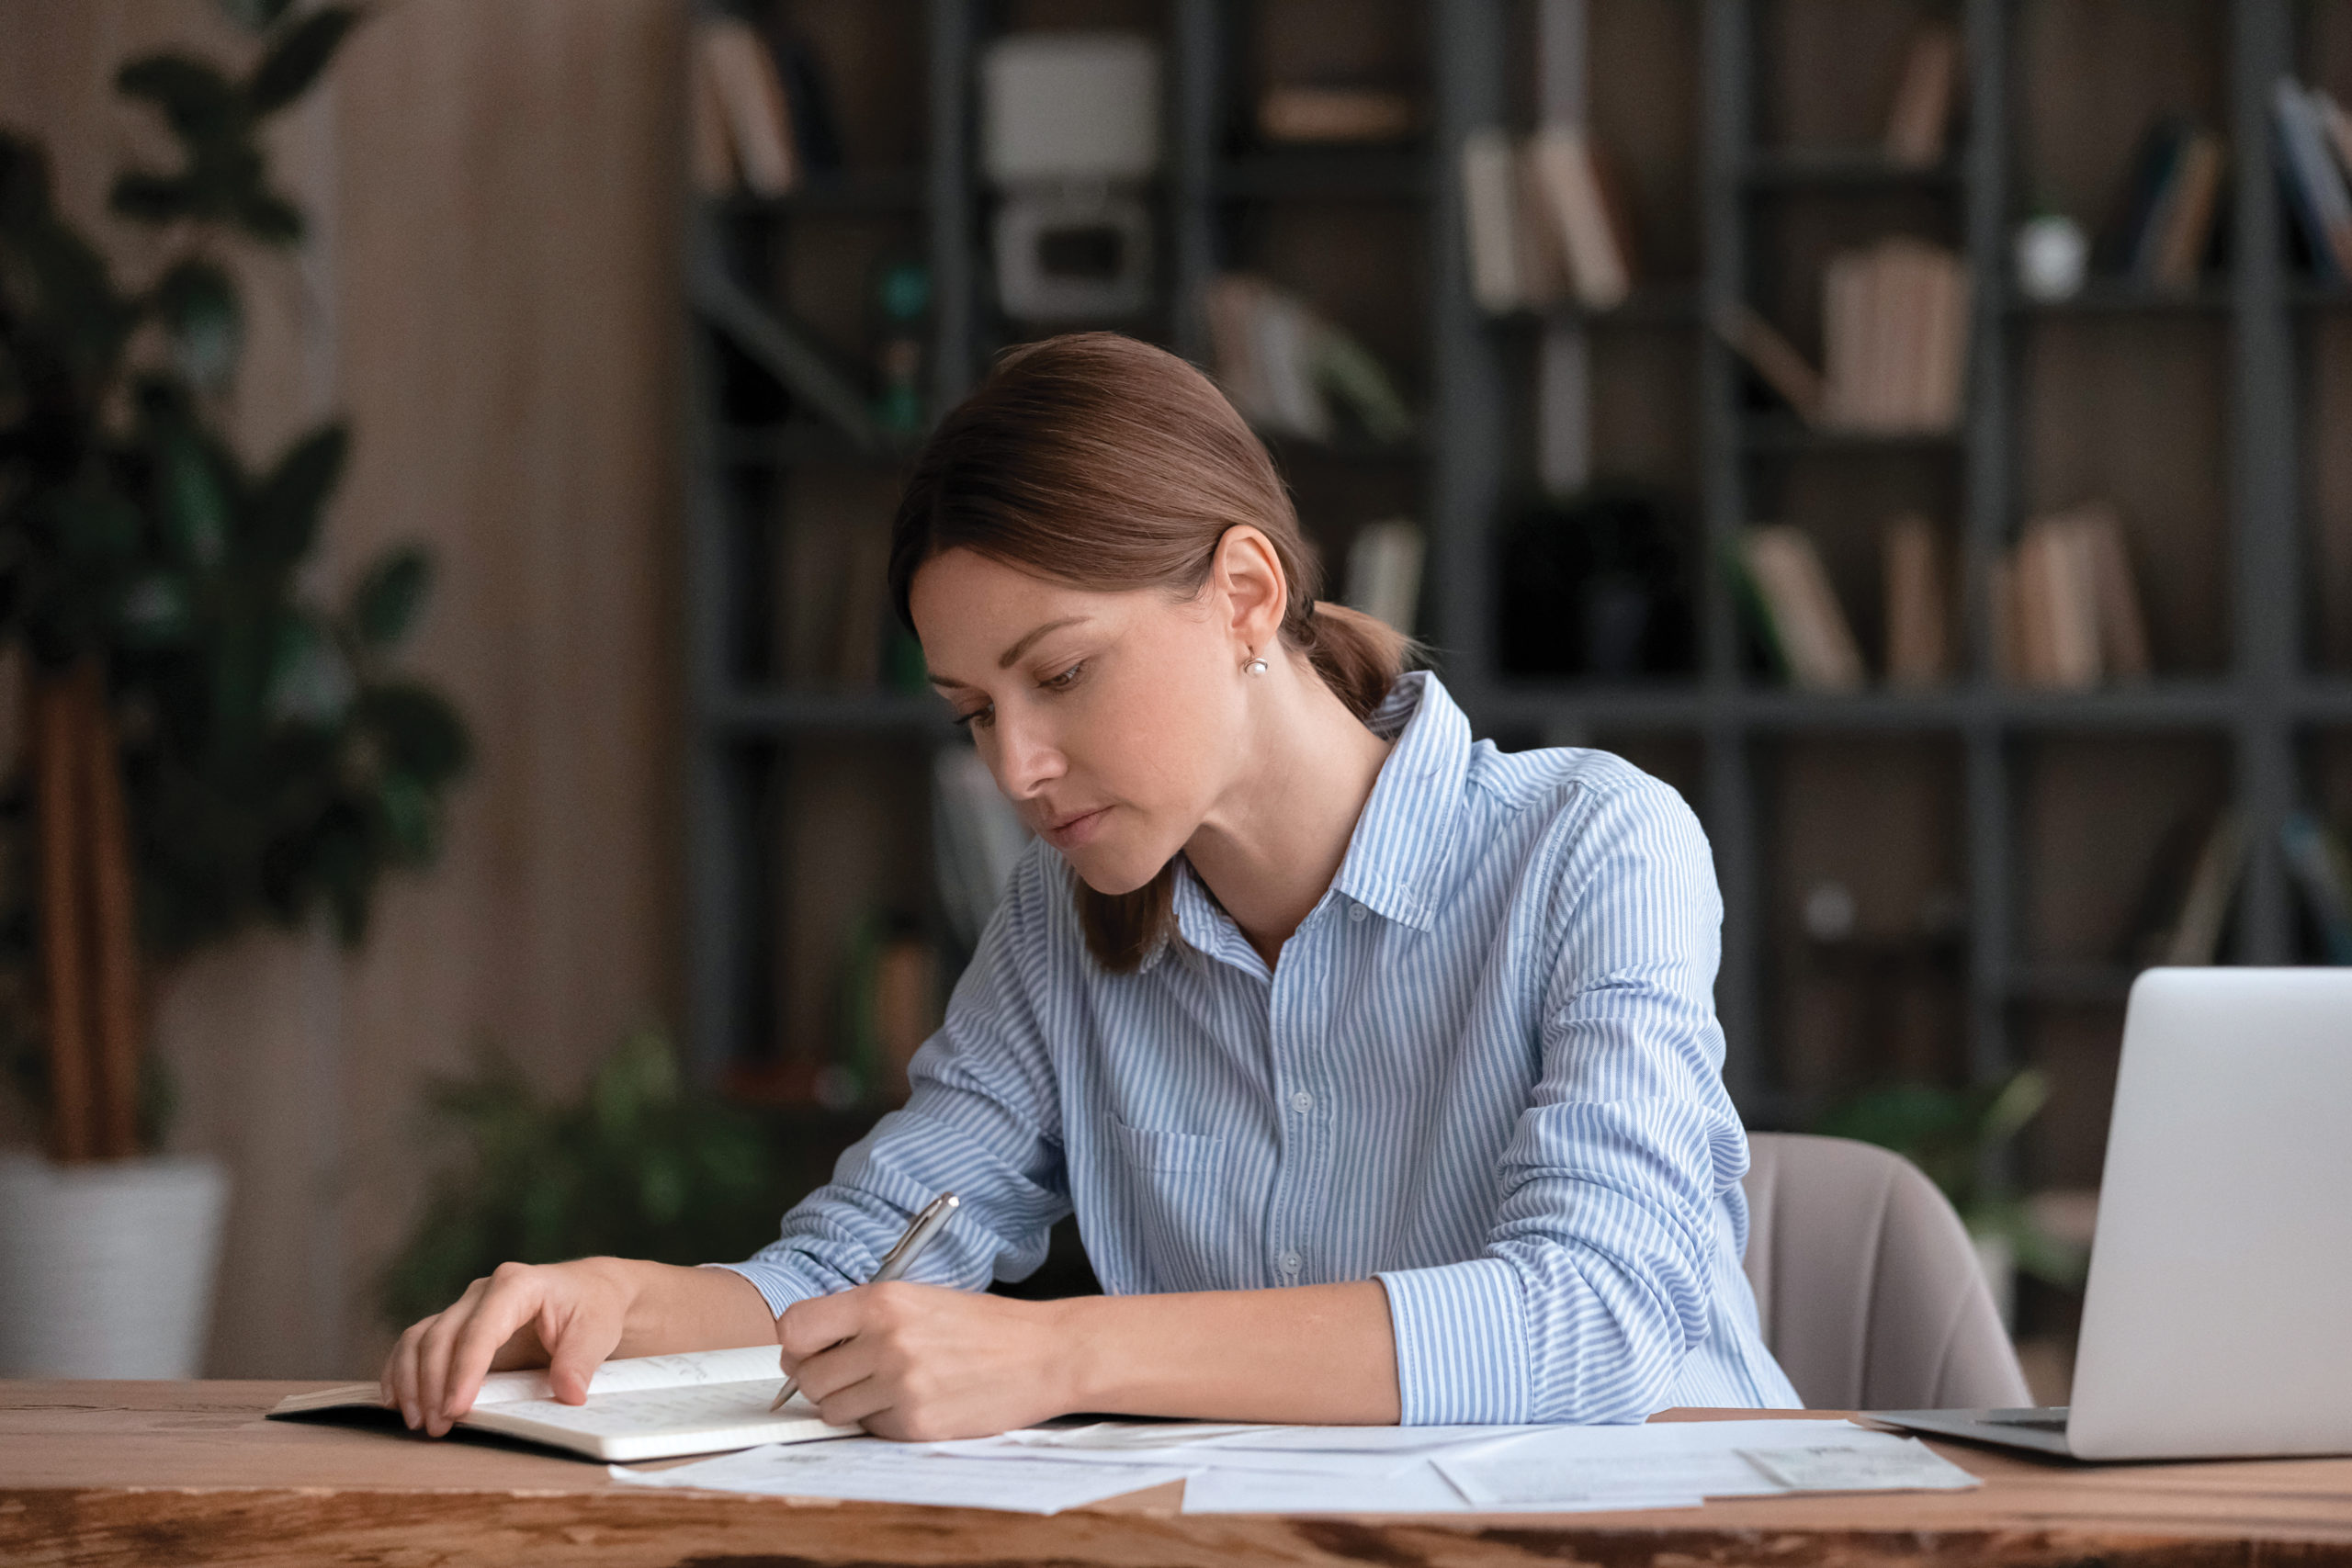 Concentrated young 30s caucasian woman writing business notes in paper organizer, planning future investments or managing monthly budget, reviewing bills or taxes, sitting at table at home office.